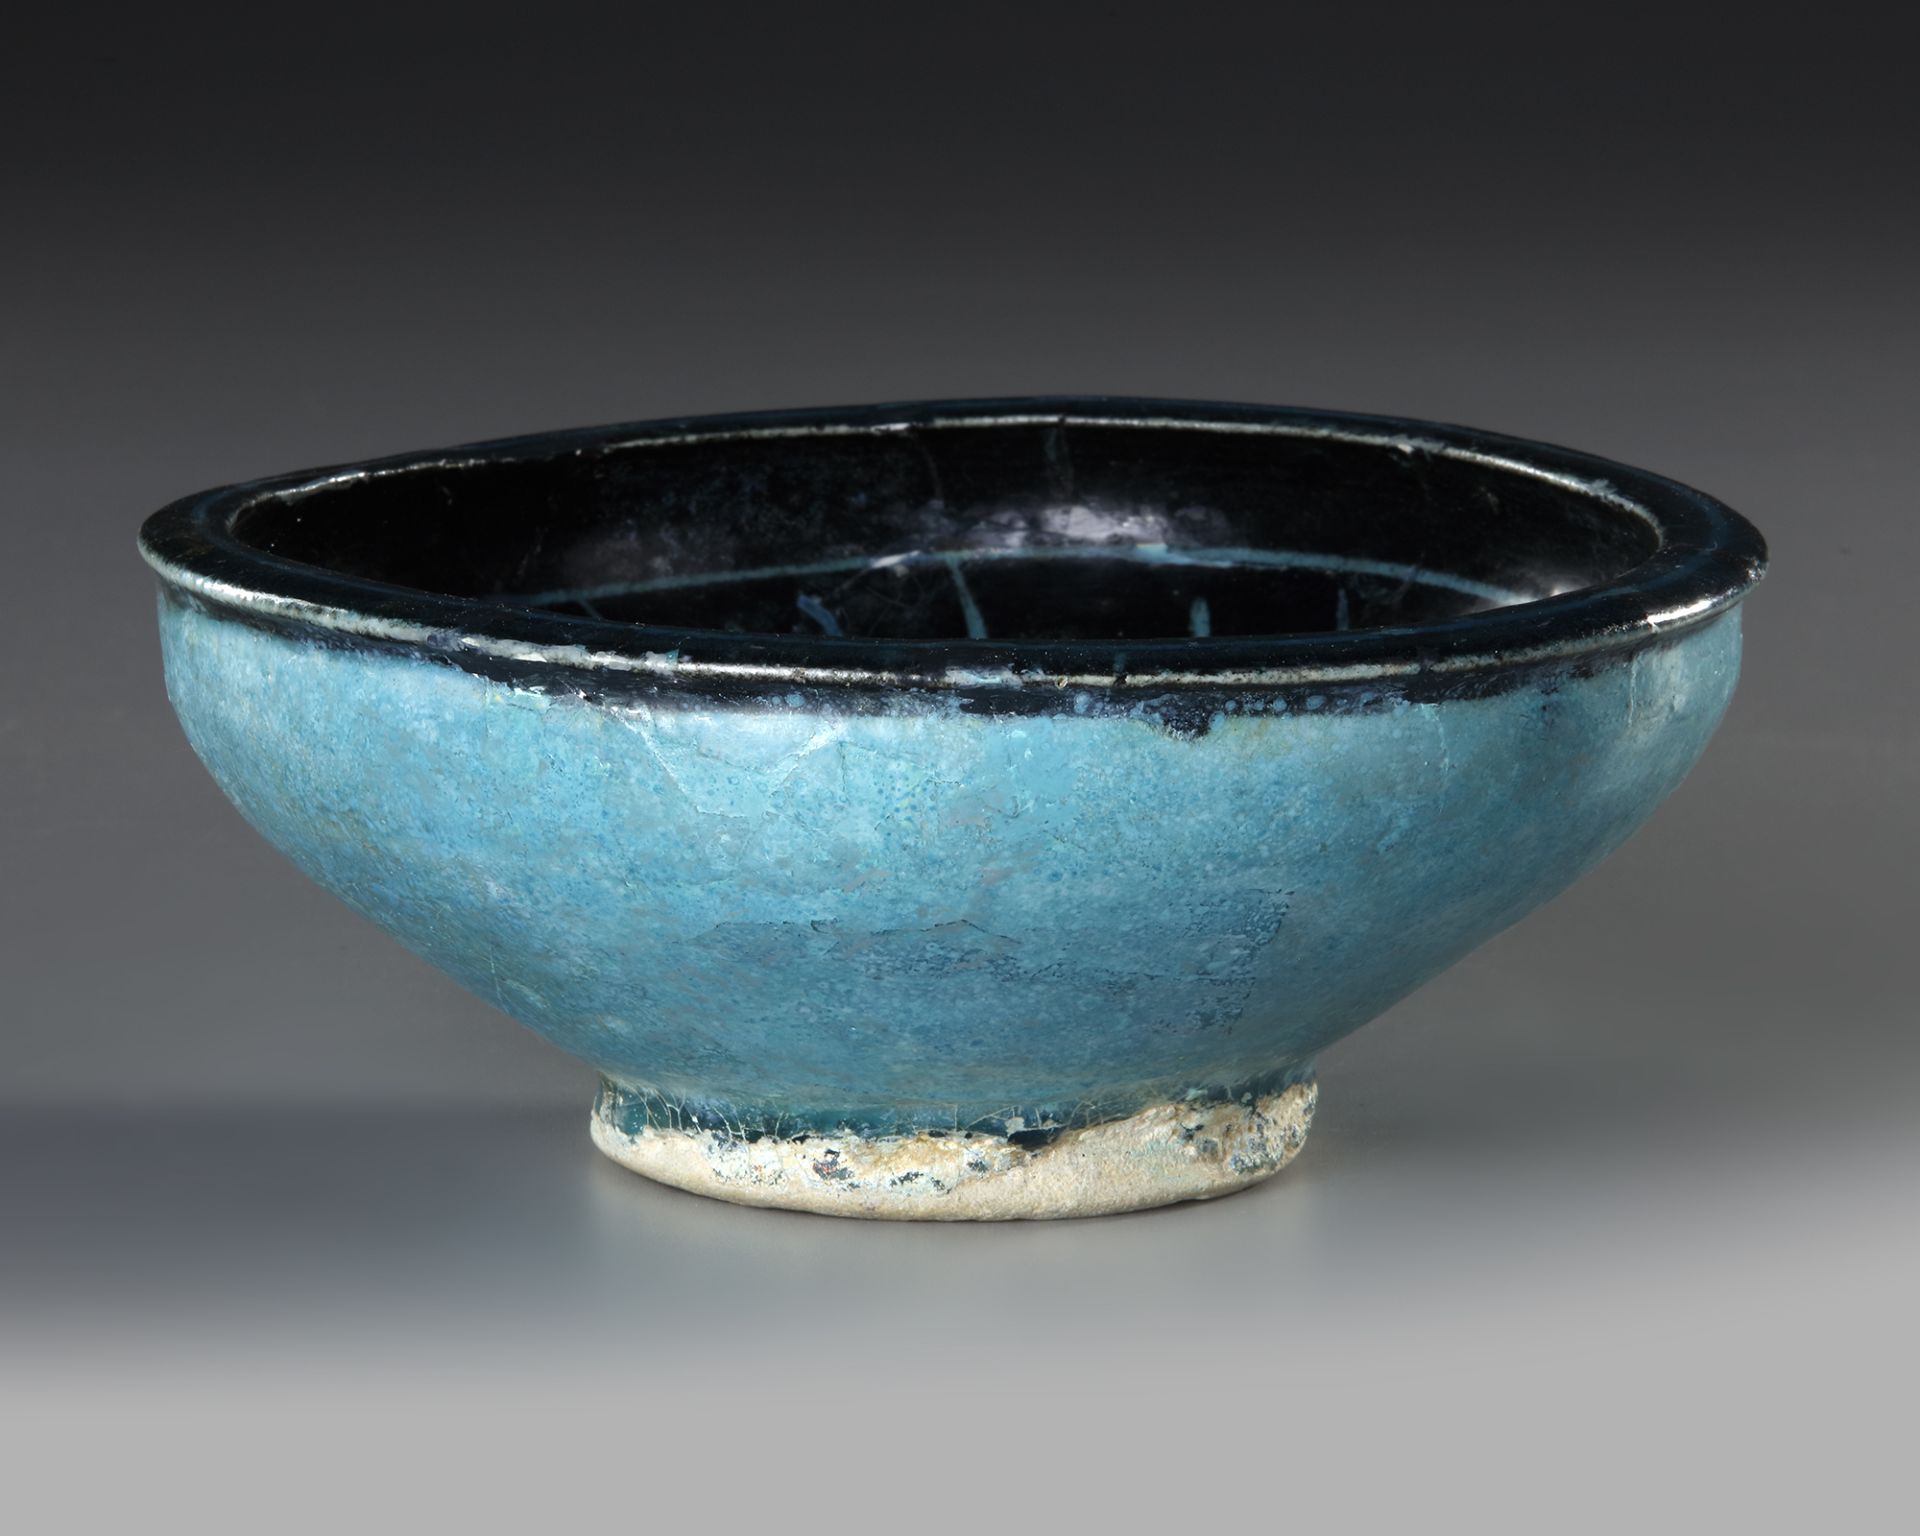 A BLACK AND TURQUOISE GLAZED KASHAN BOWL, PERSIA, 13TH CENTURY - Image 5 of 8